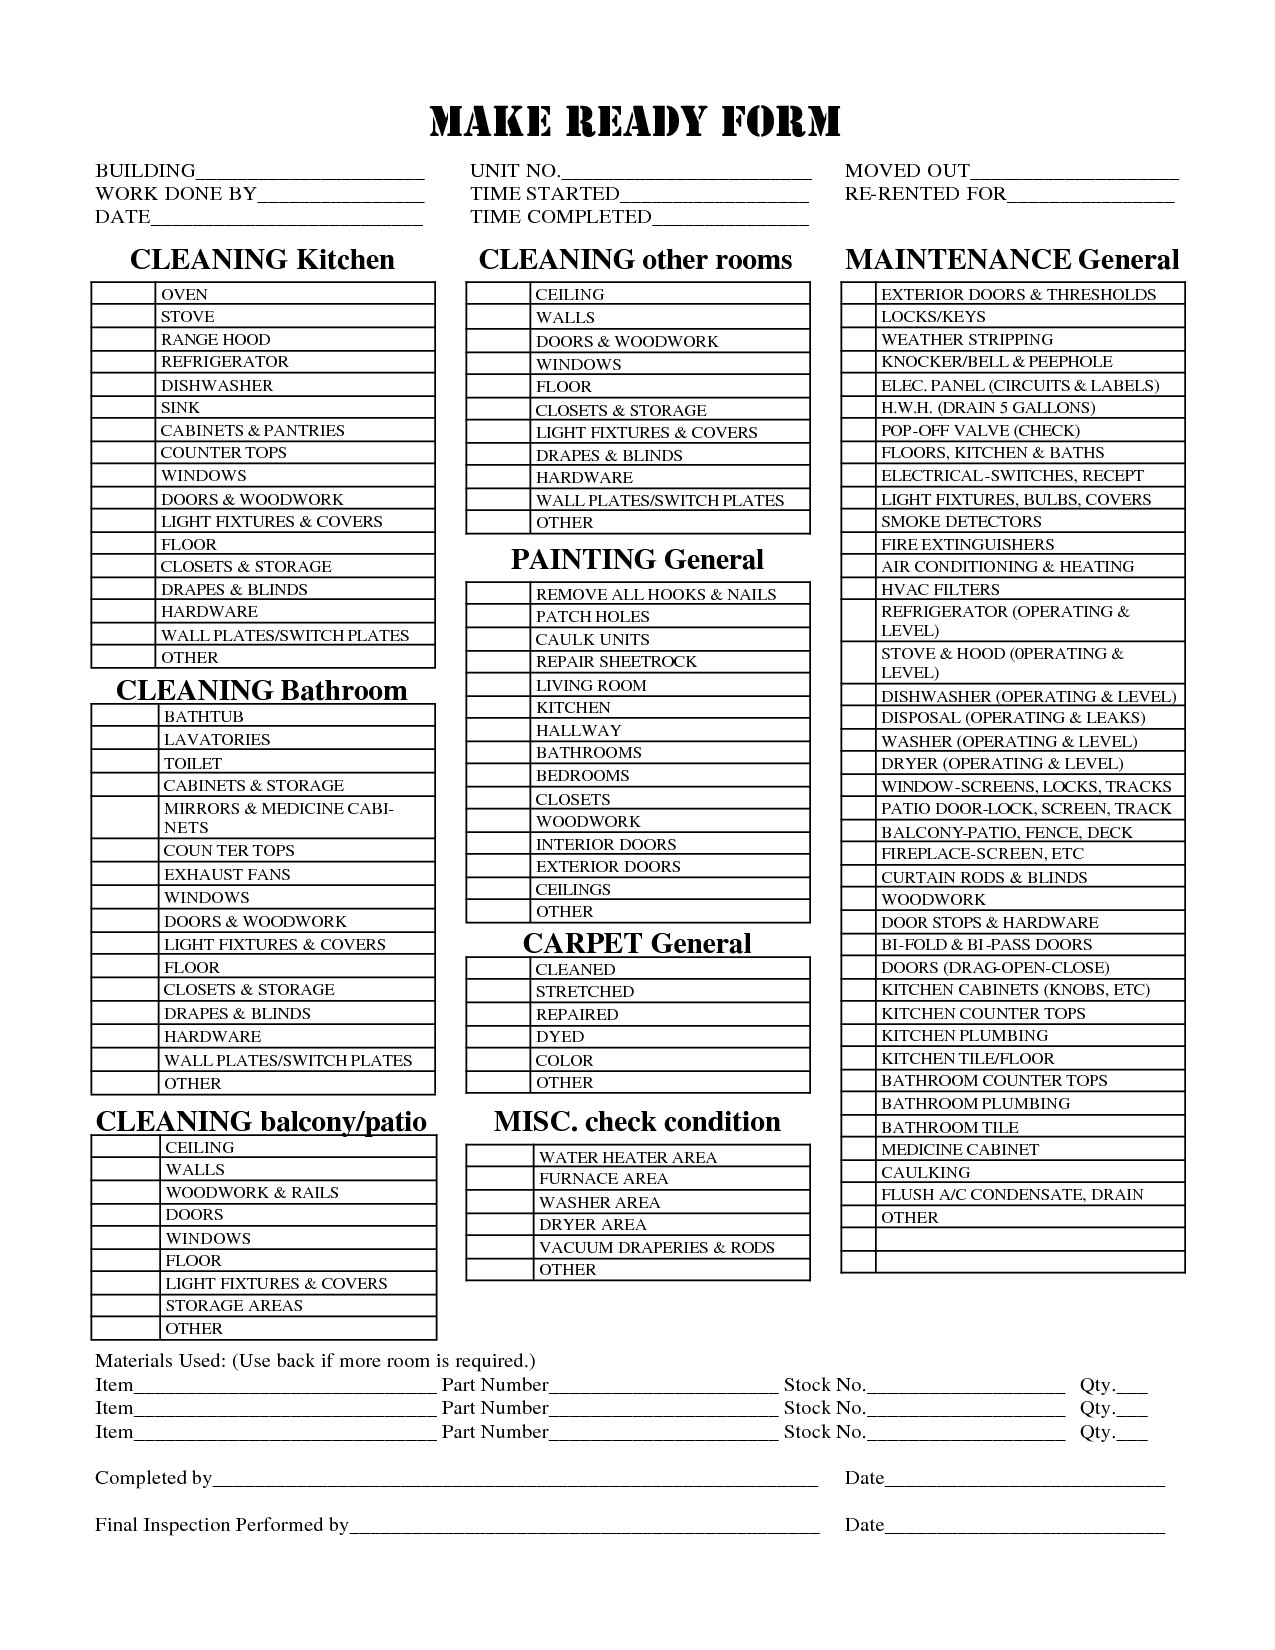 check list for apartment make ready Google Search